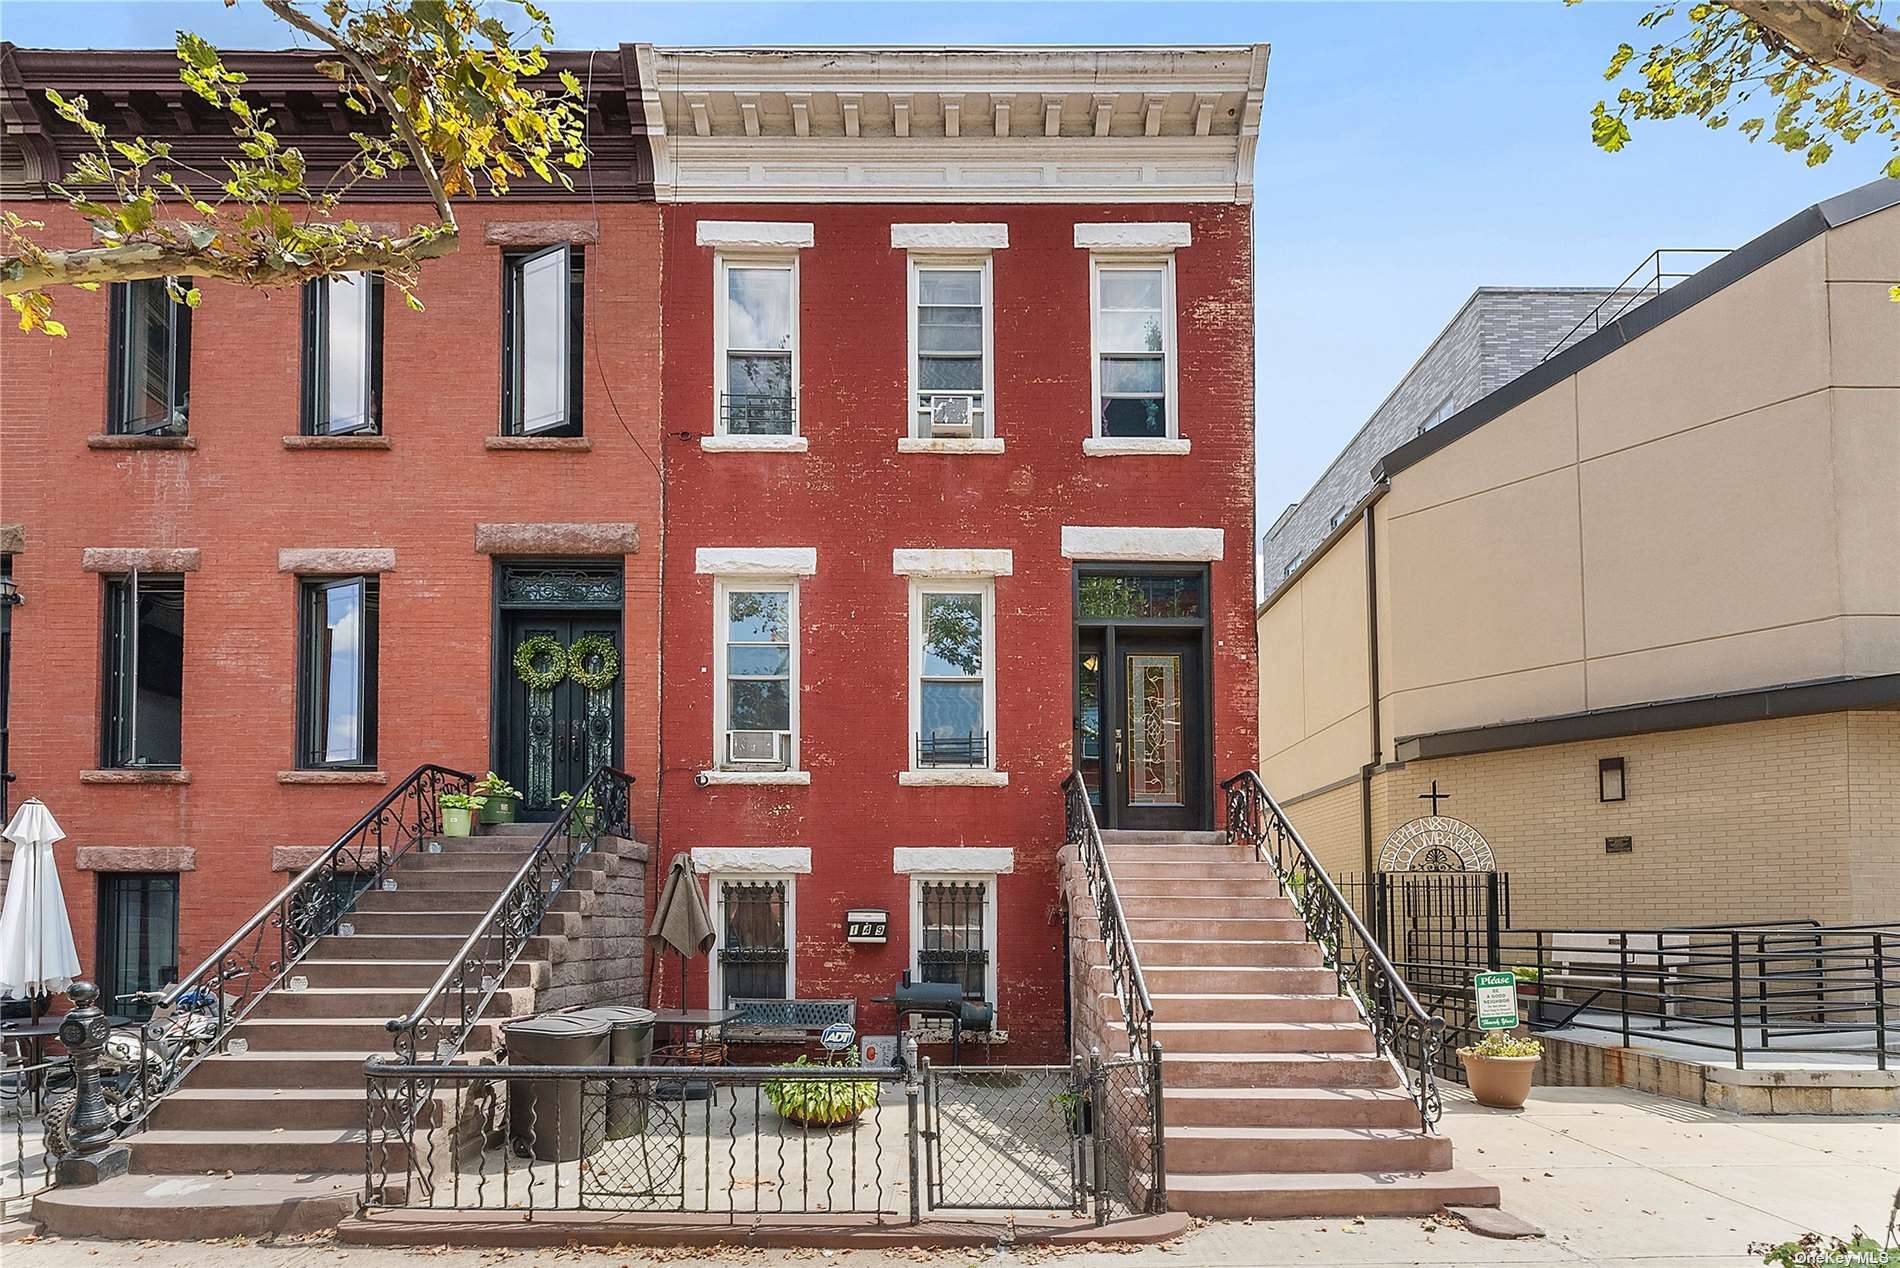 Welcome To 149 Patchen Ave 149 Patchen Ave is a 2 Family Townhouse located in Bedford Stuyvesant.